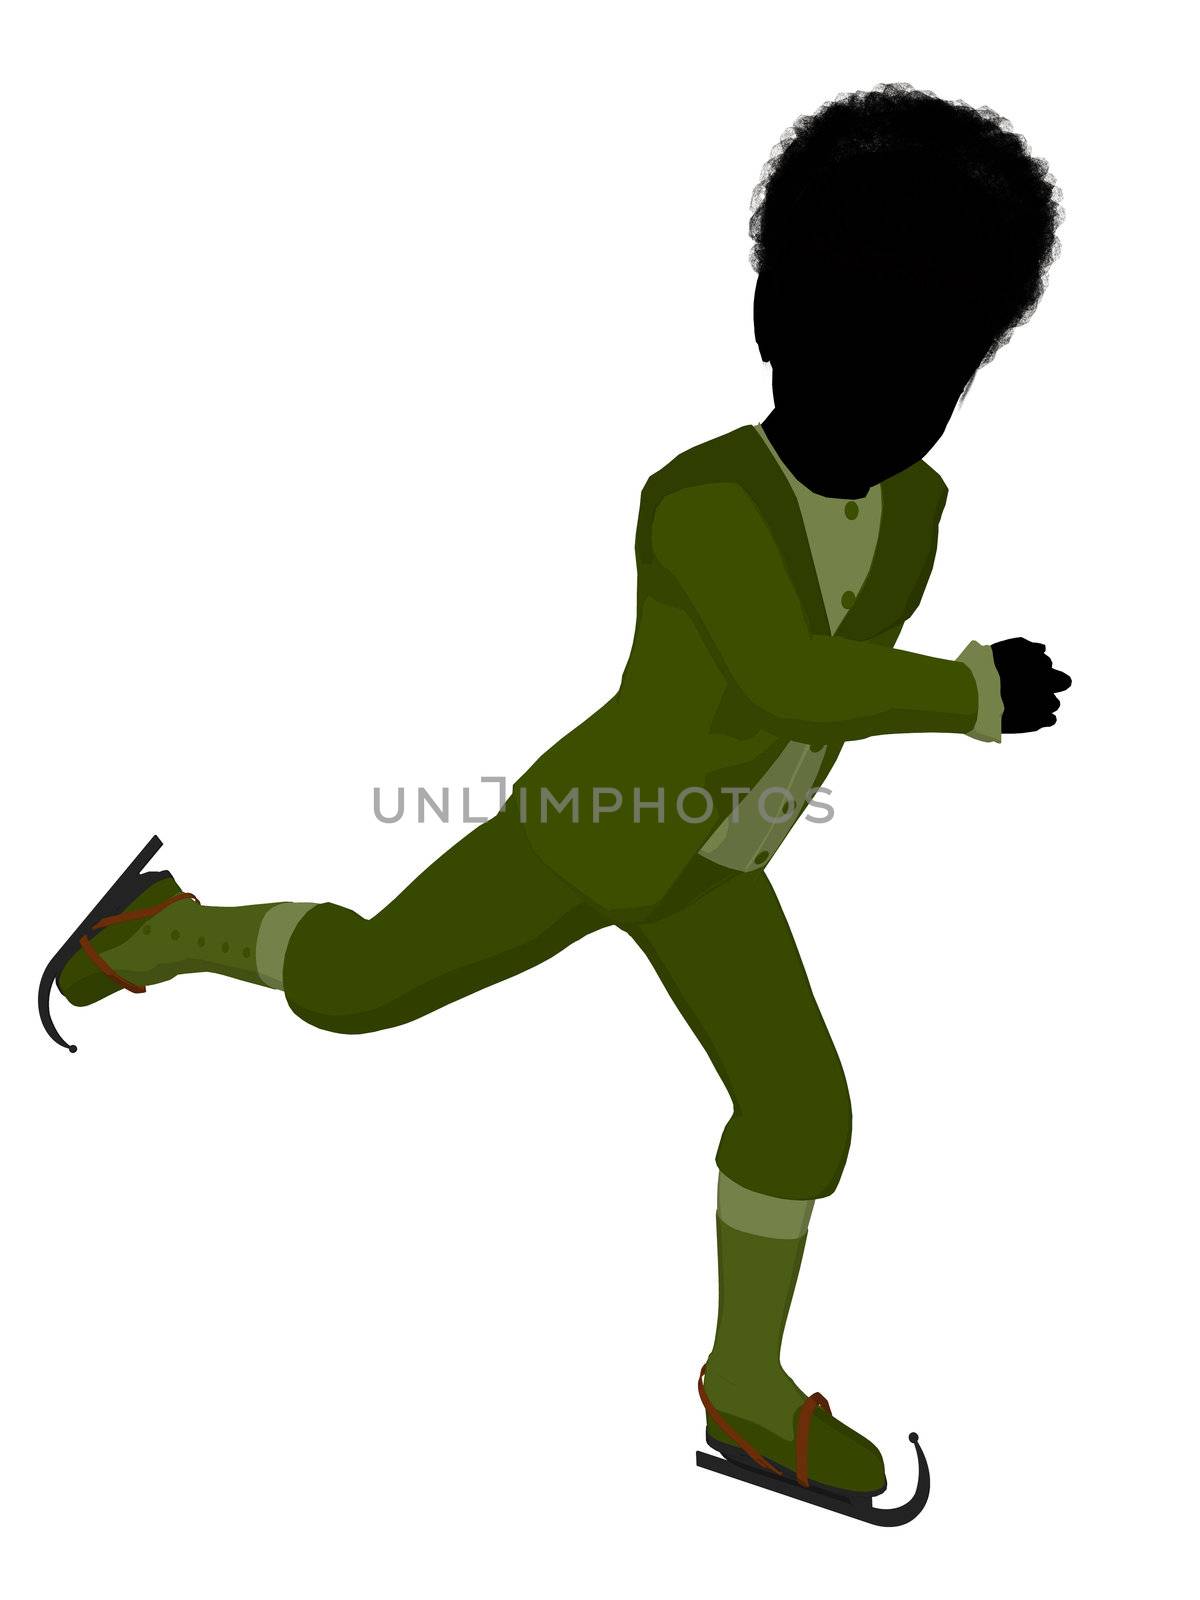 African american victorian boy on ice skates silhouette on a white background